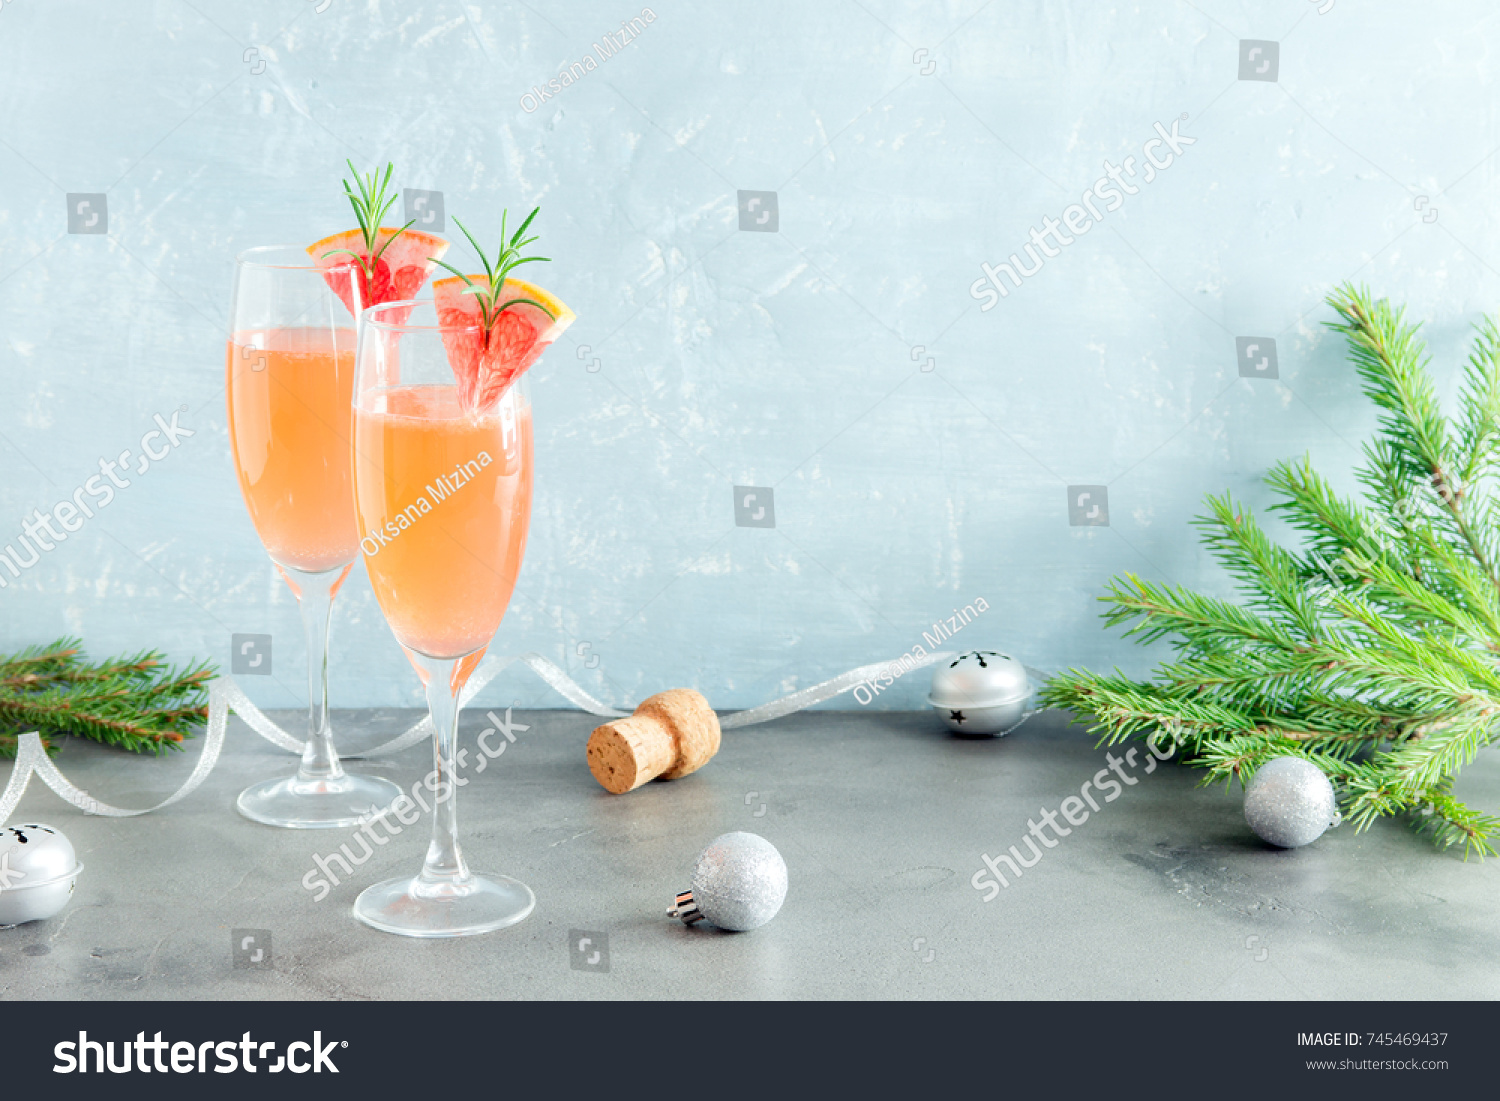 Mimosa Festive Drink Christmas Champagne Cocktail Stock Photo Edit Now 745469437